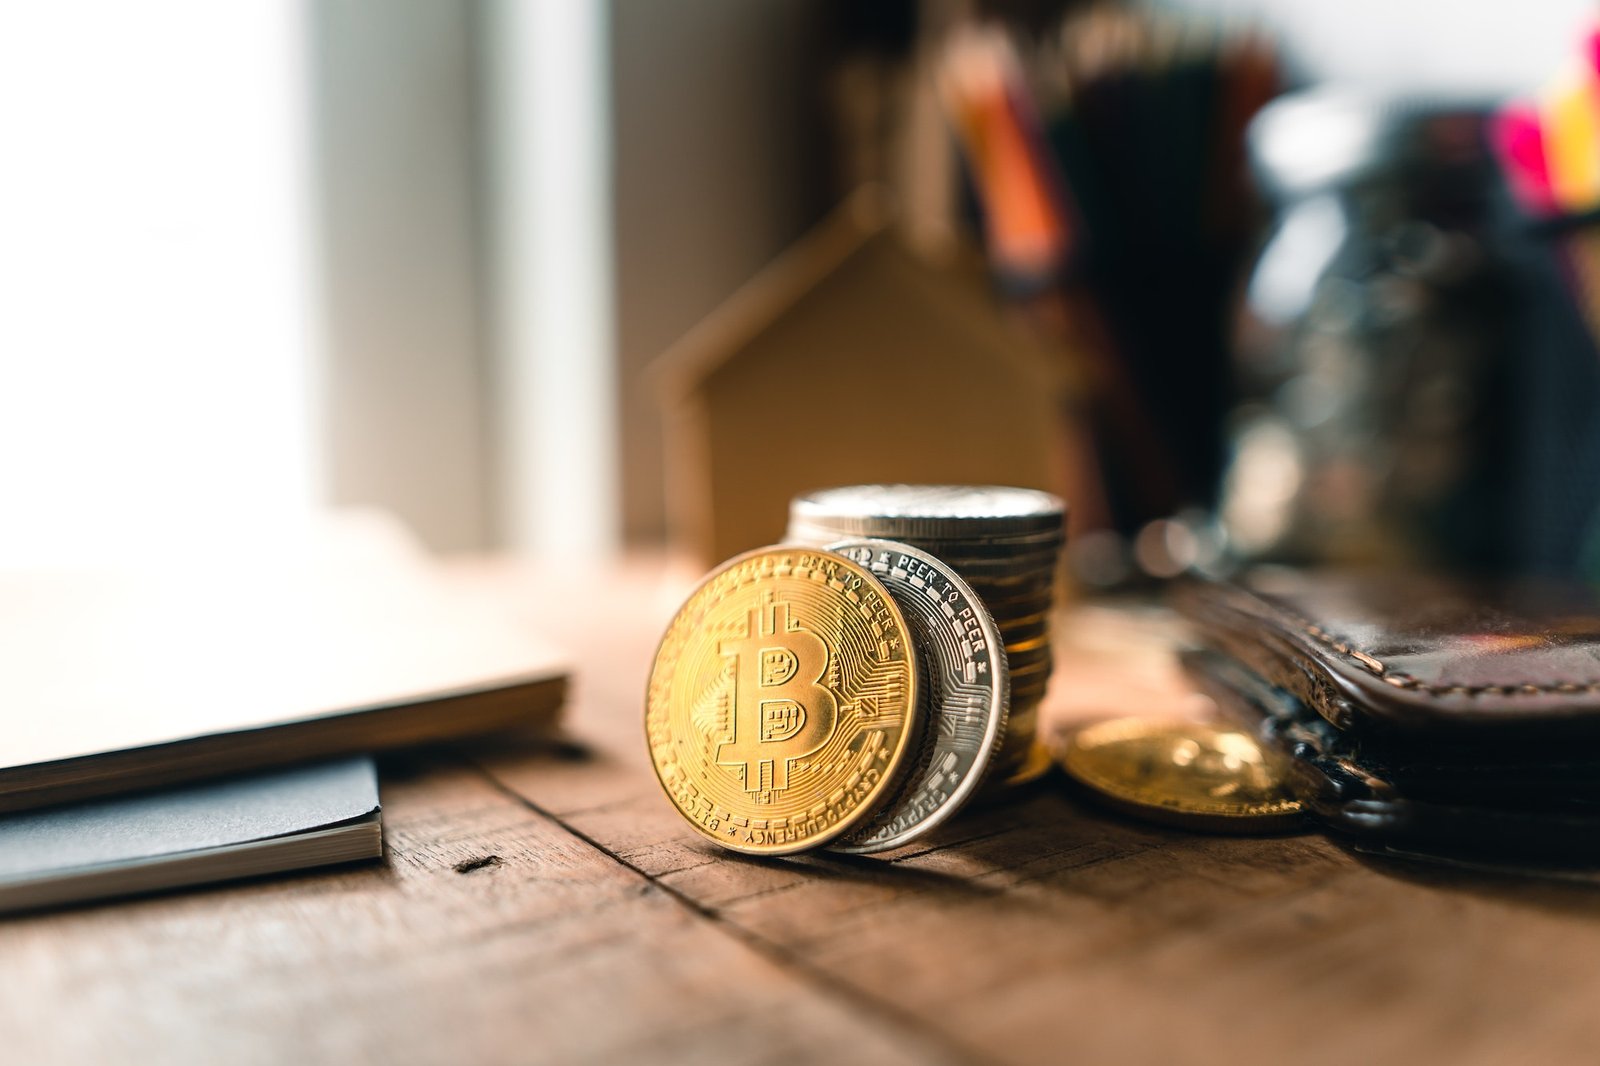 Bitcoin coins on a wooden desk at home